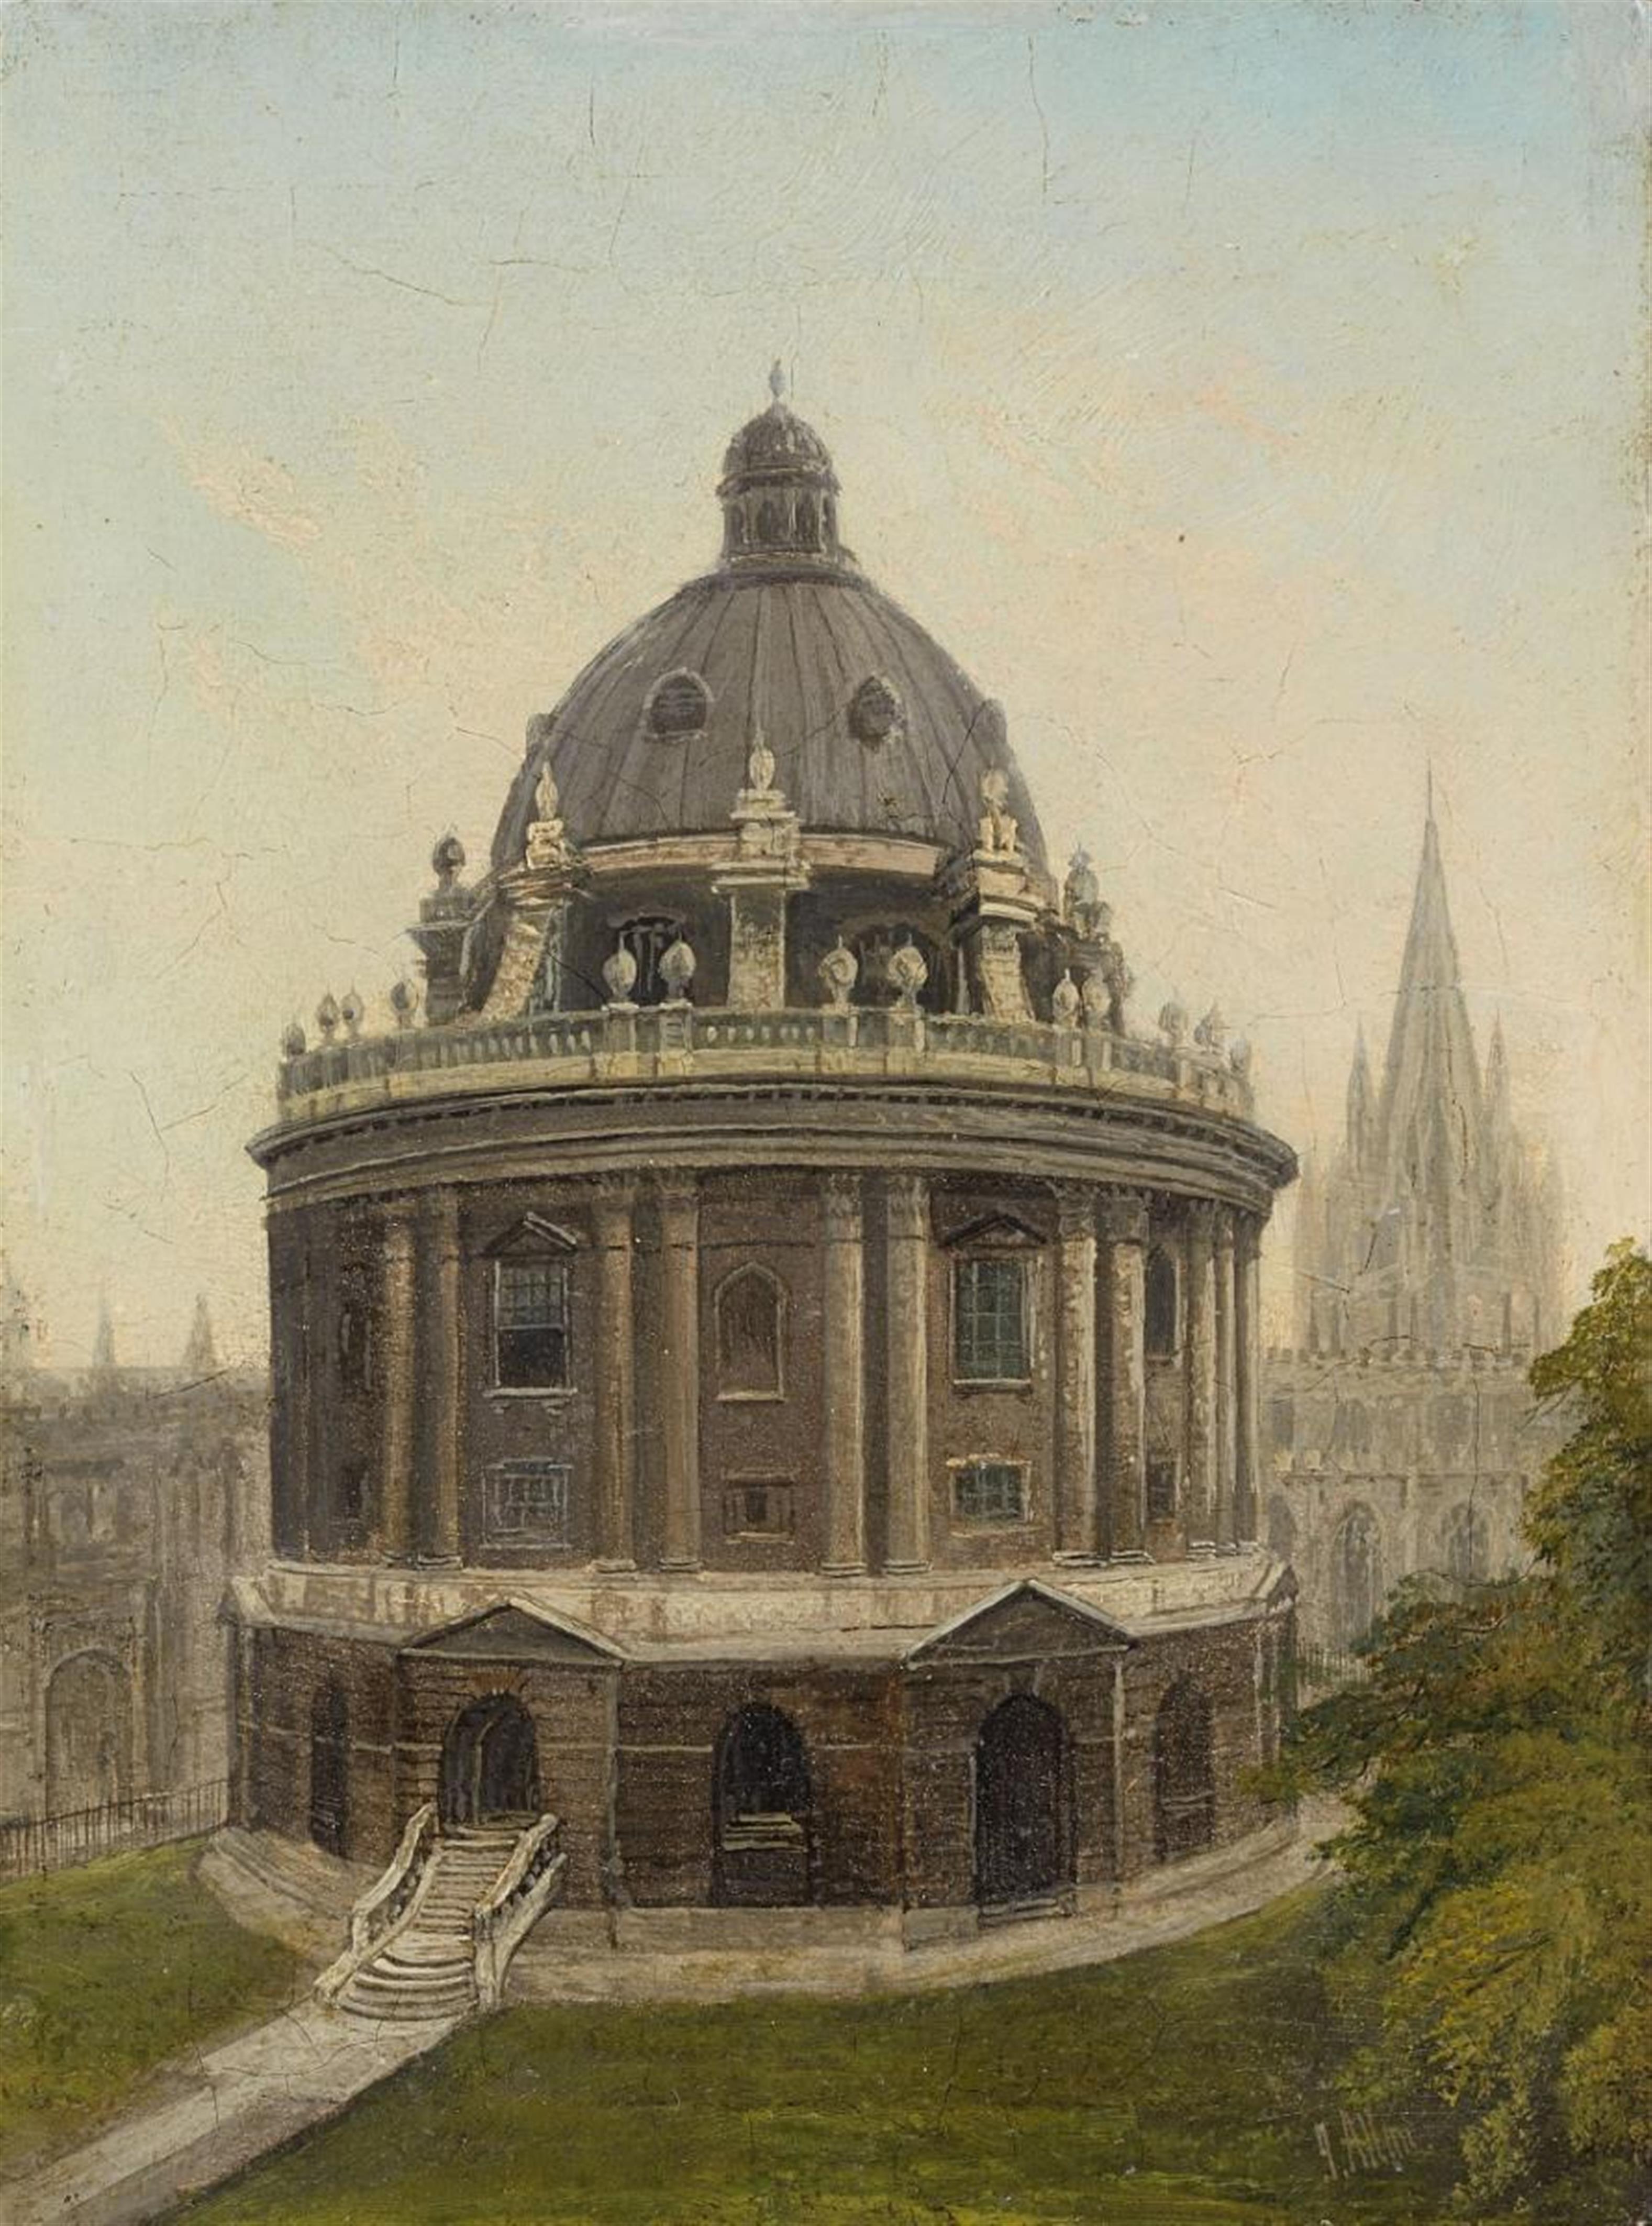 J. ALLAN - VIEW OF THE RADCLIFFE CAMERA IN OXFORD - image-1